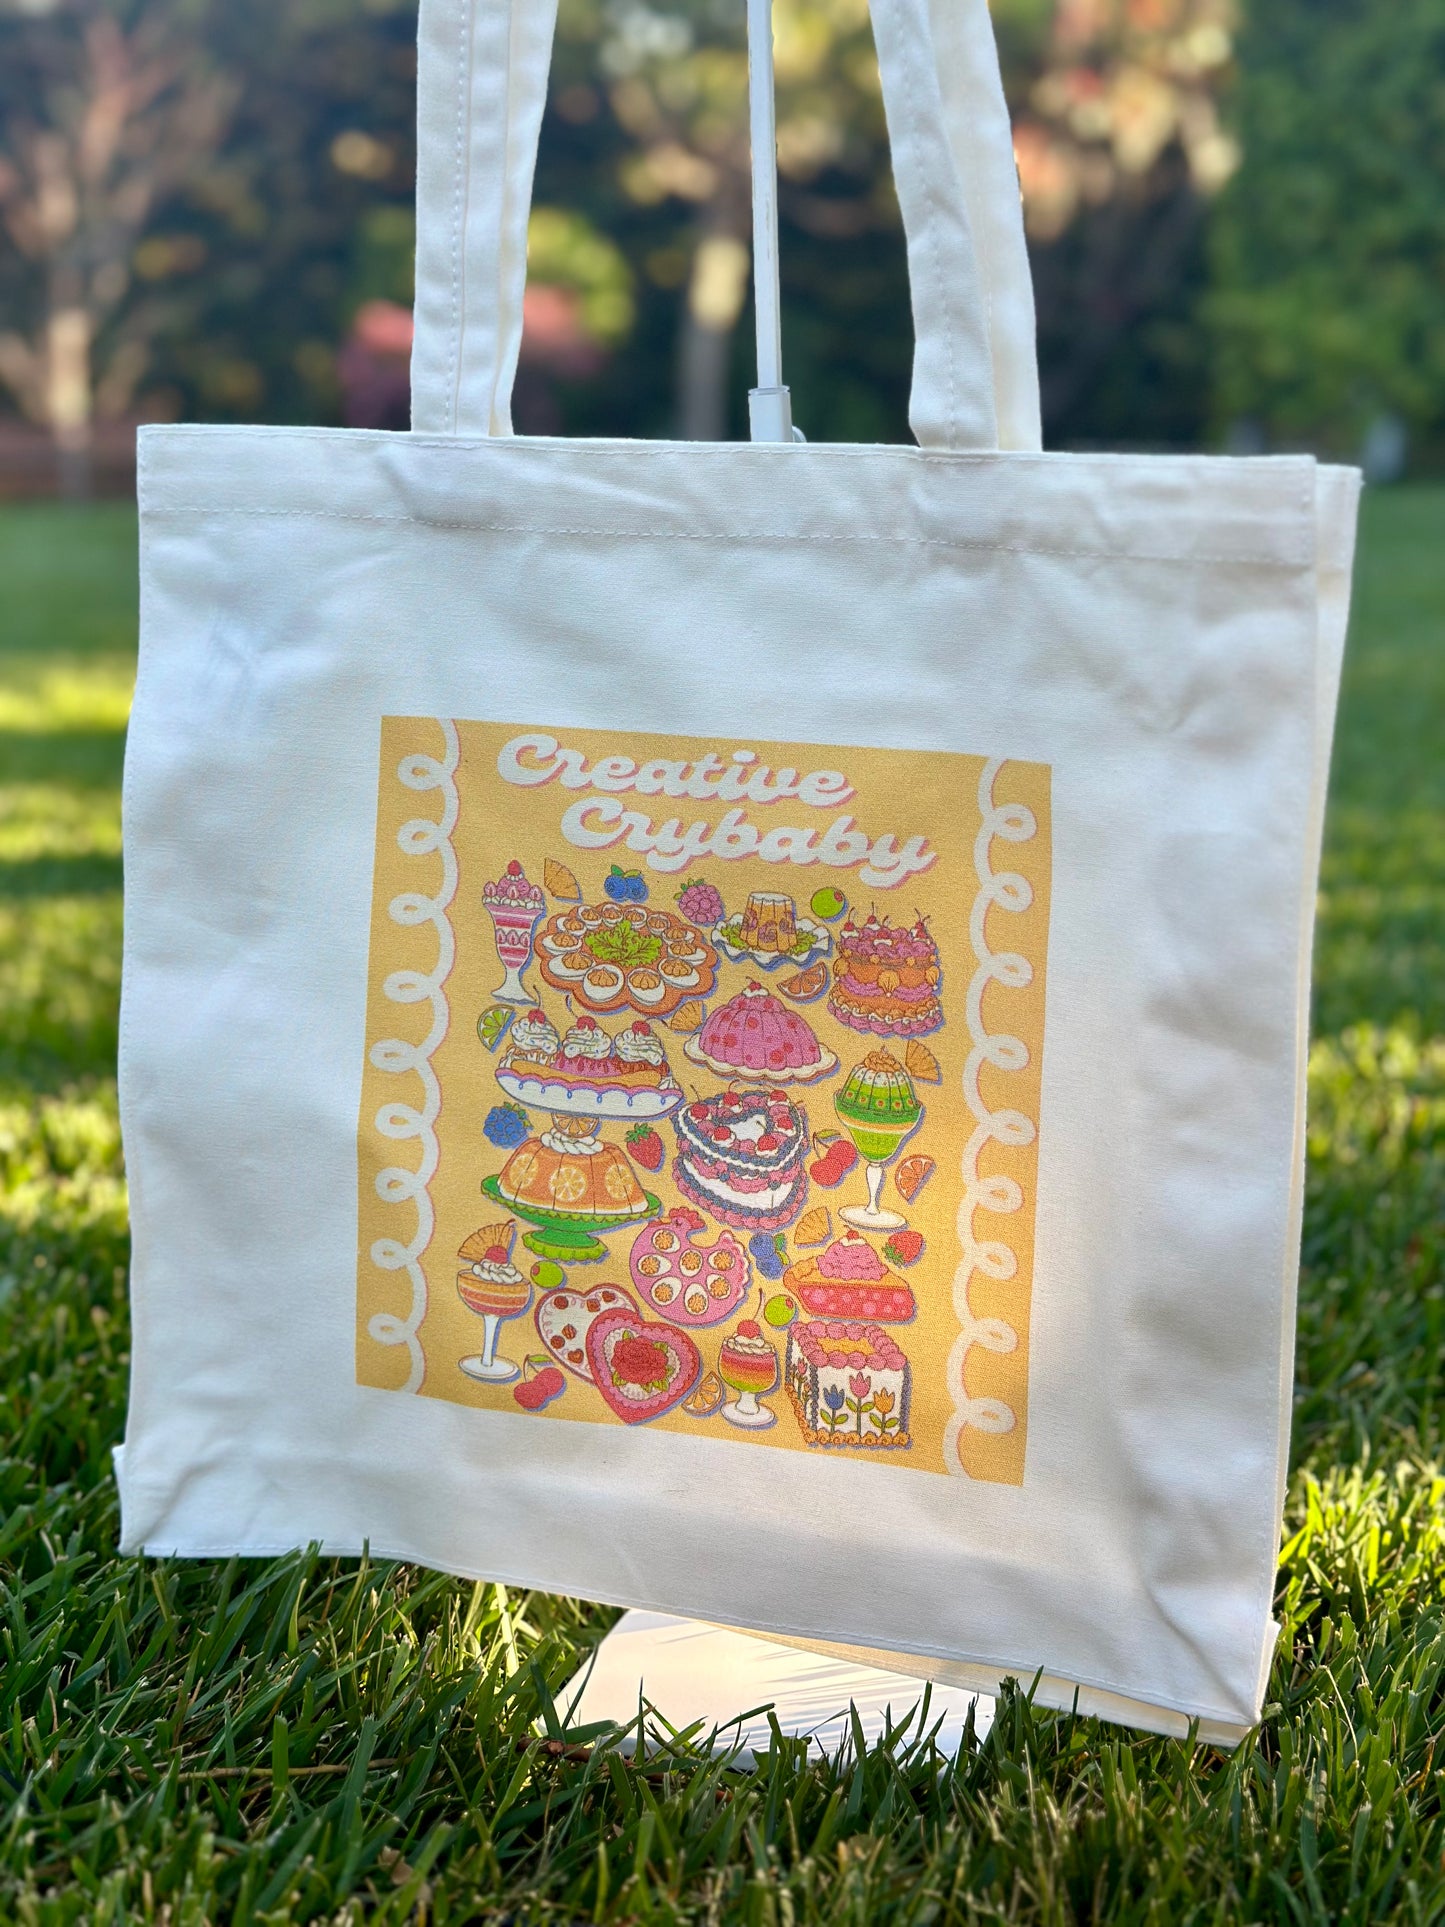 Creative Crybaby Tote with Vintage Goodies